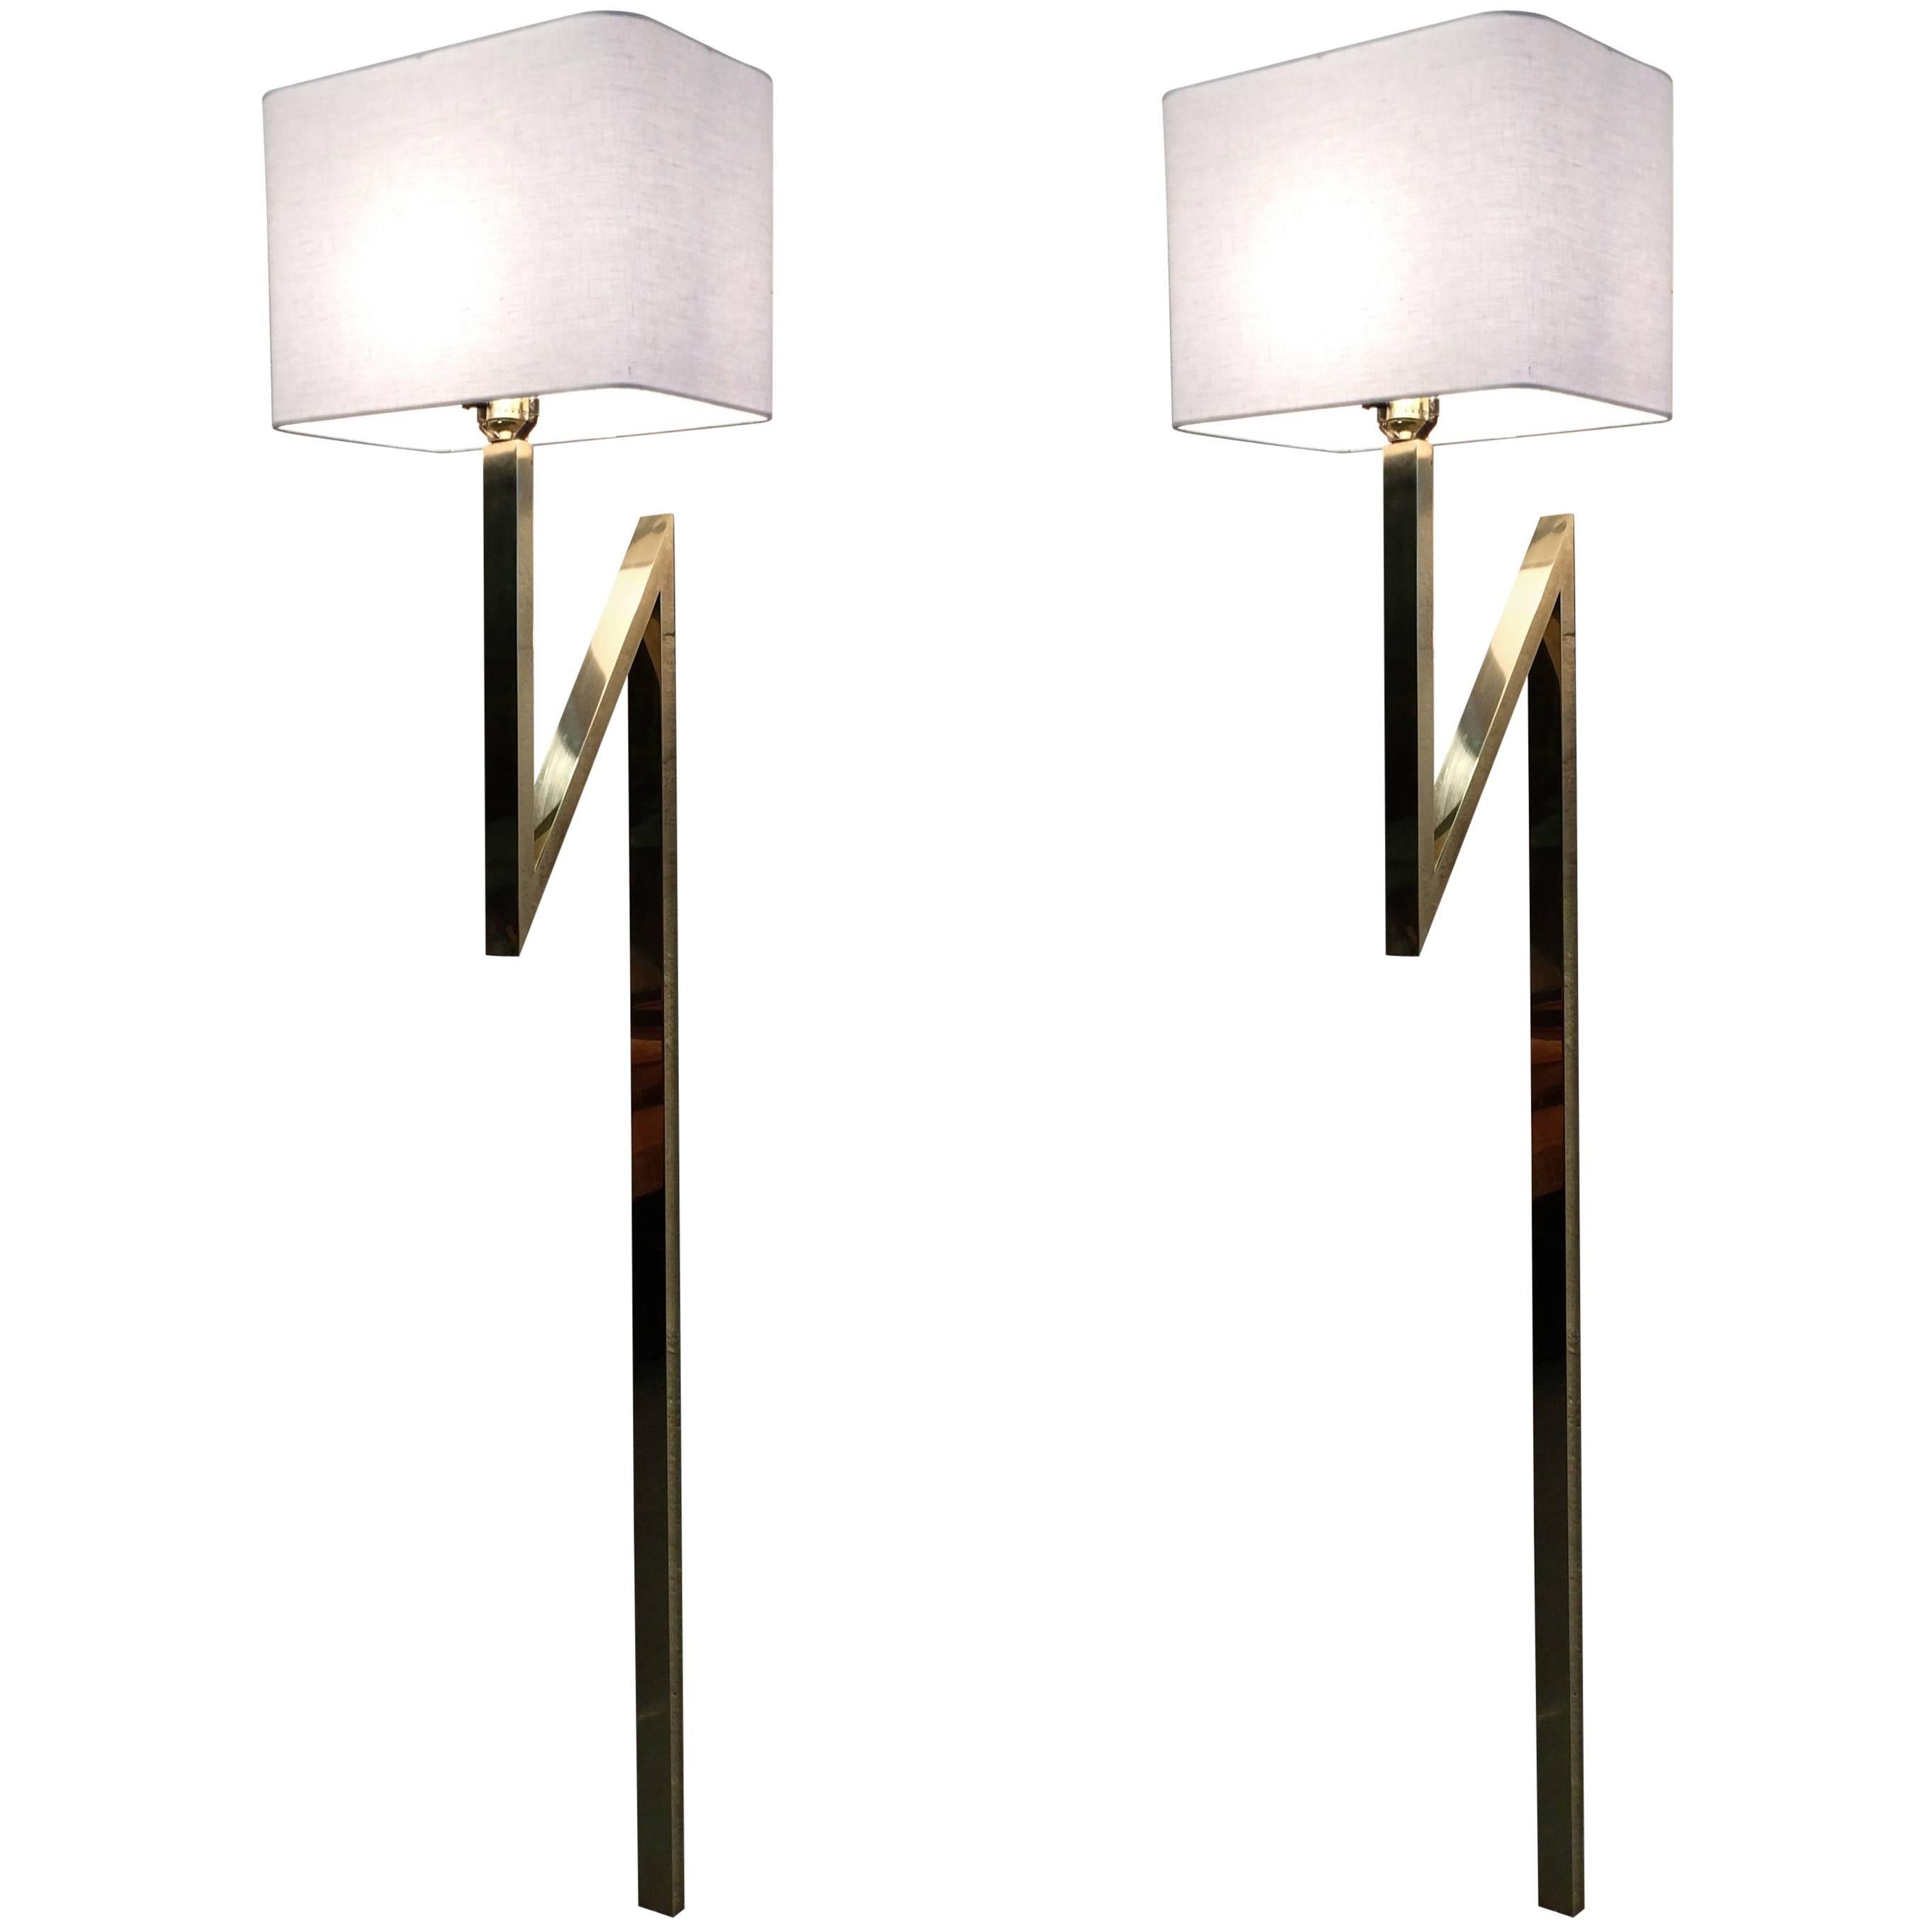 Stunning Brass Wall Lights Sconces For Sale